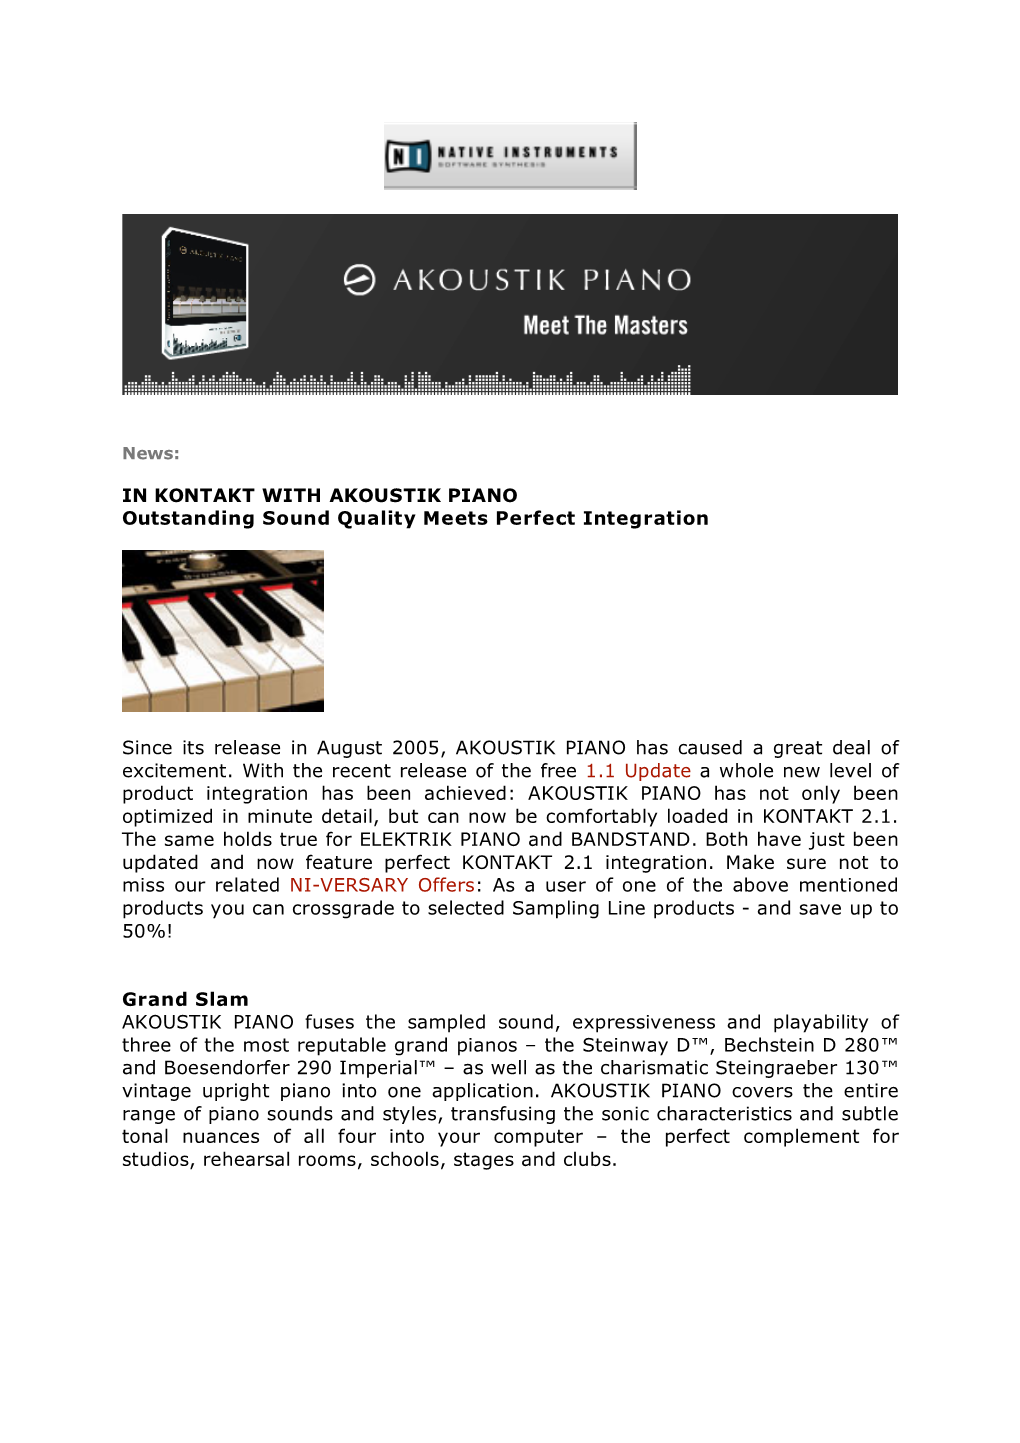 IN KONTAKT with AKOUSTIK PIANO Outstanding Sound Quality Meets Perfect Integration